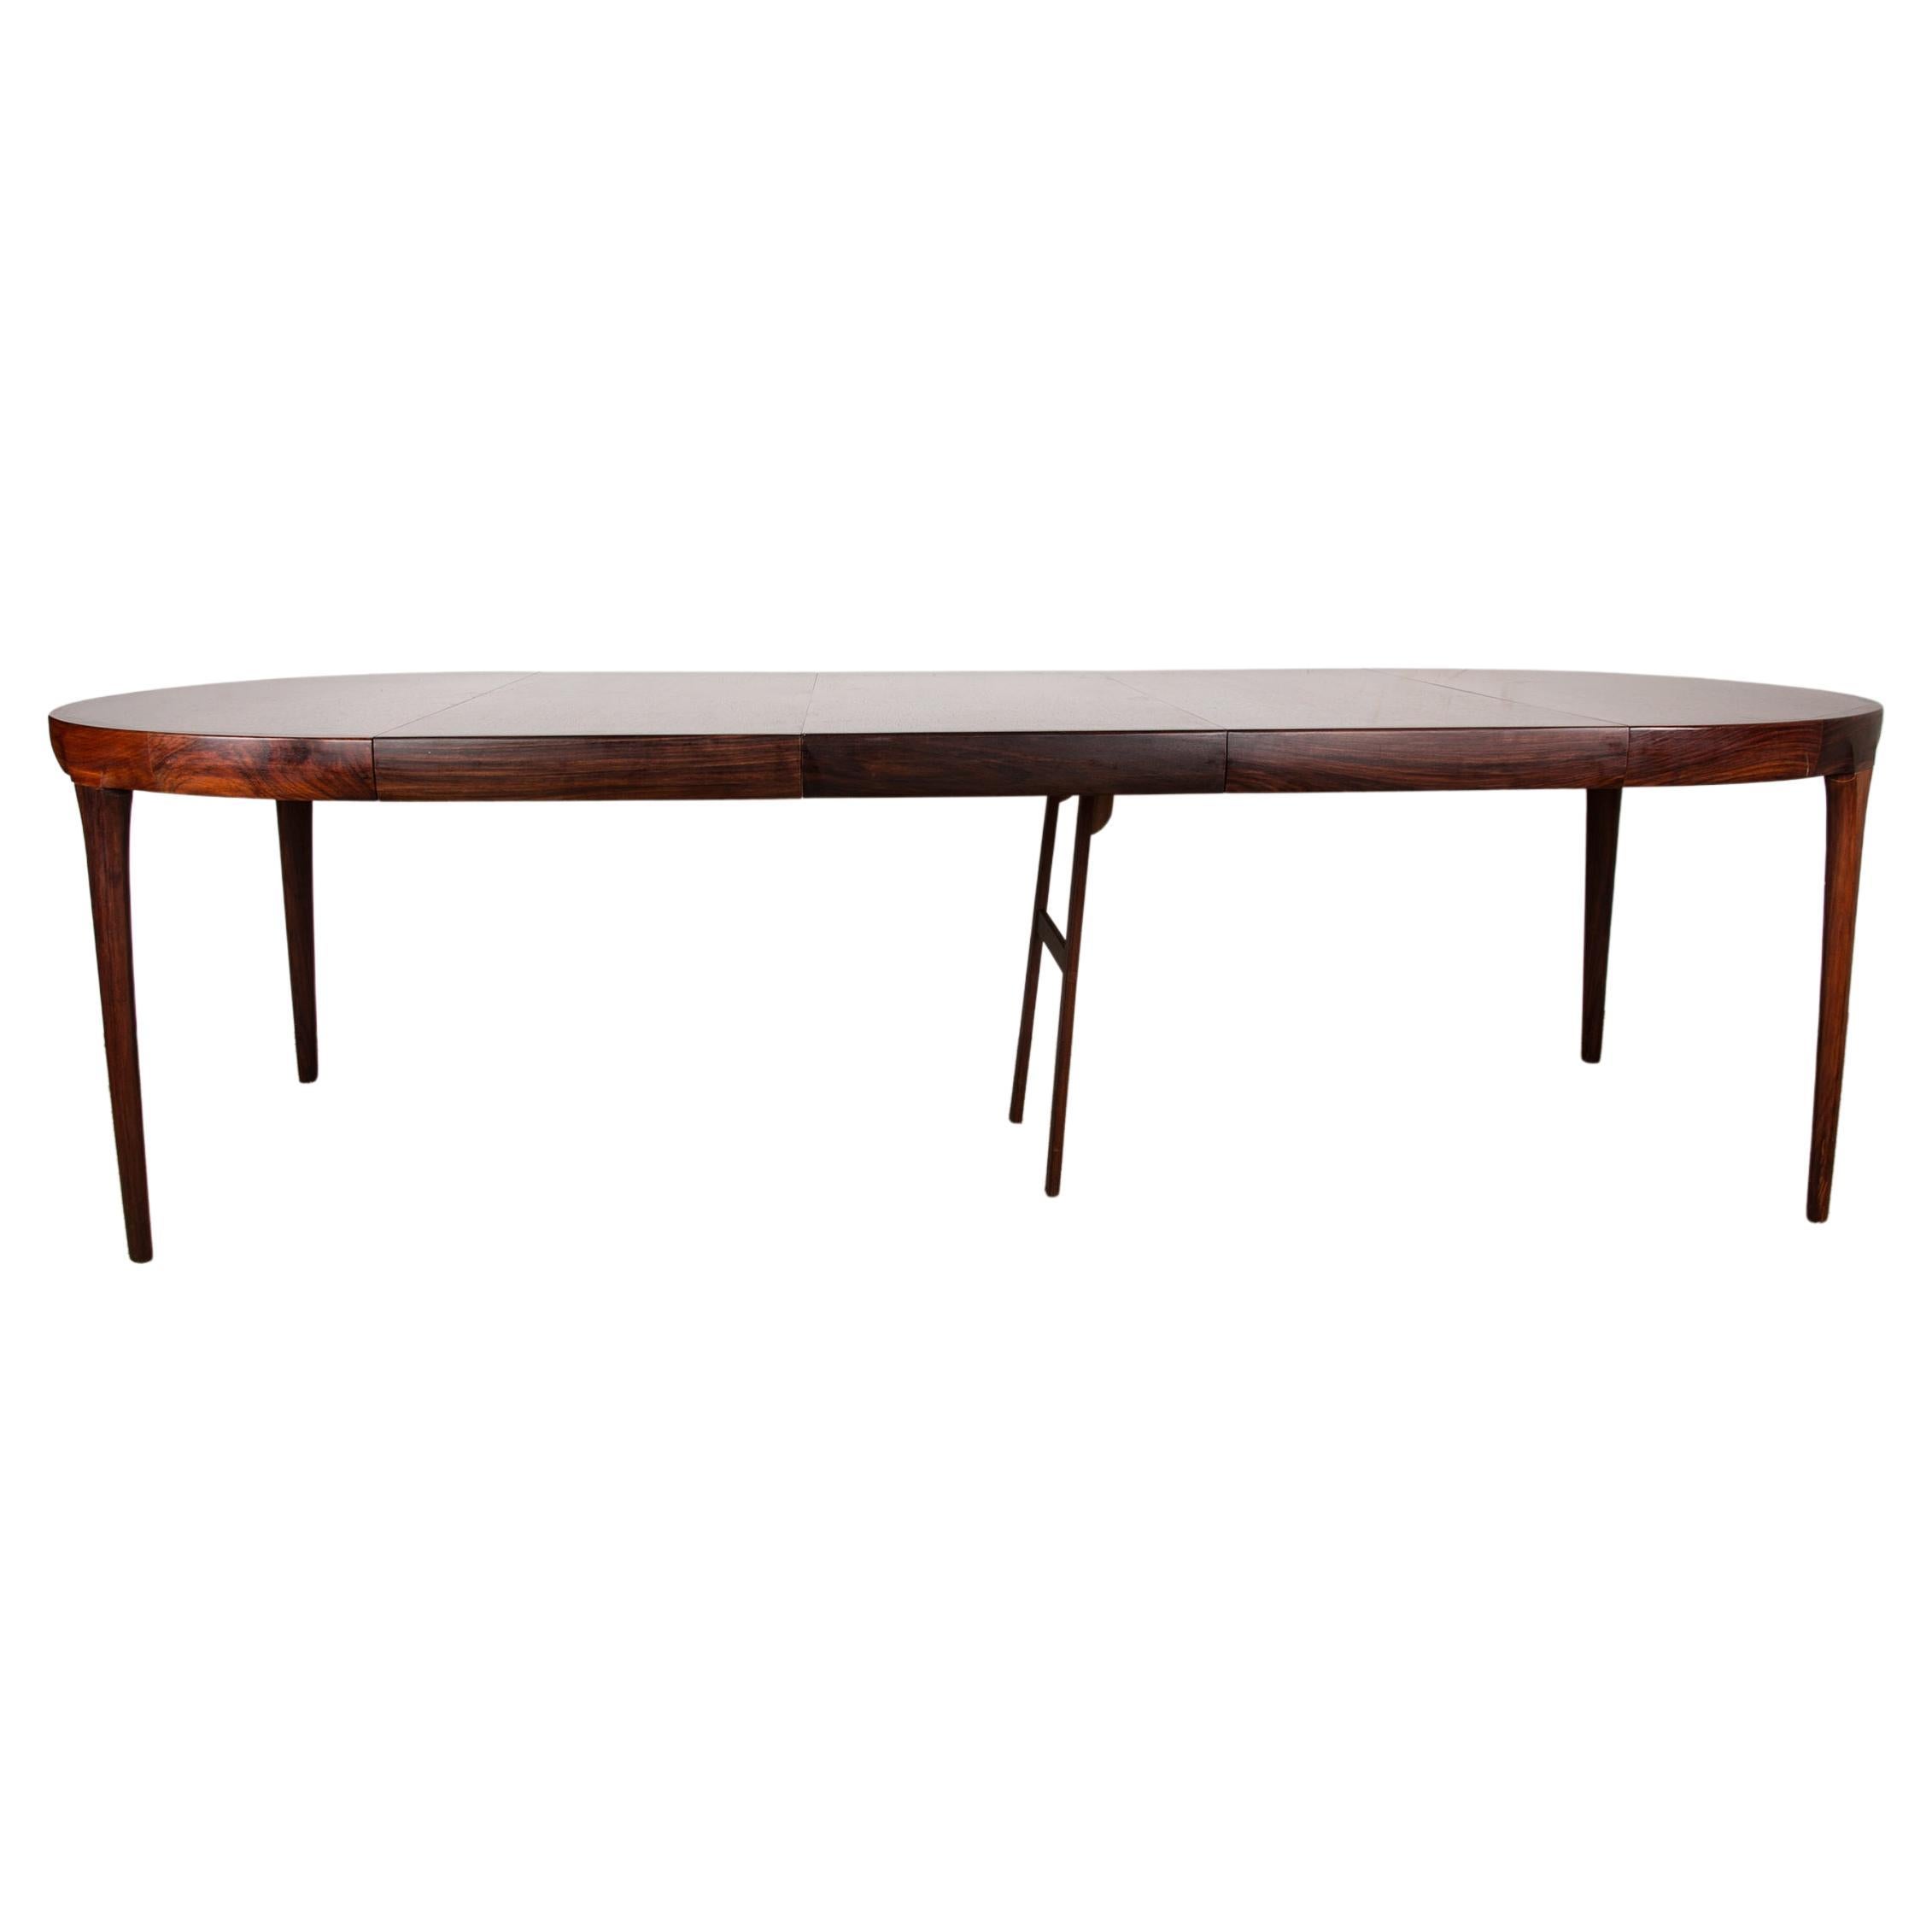 Very large extendable Danish dining table (270 cm)  Rosewood by Ib Kofod Larsen.